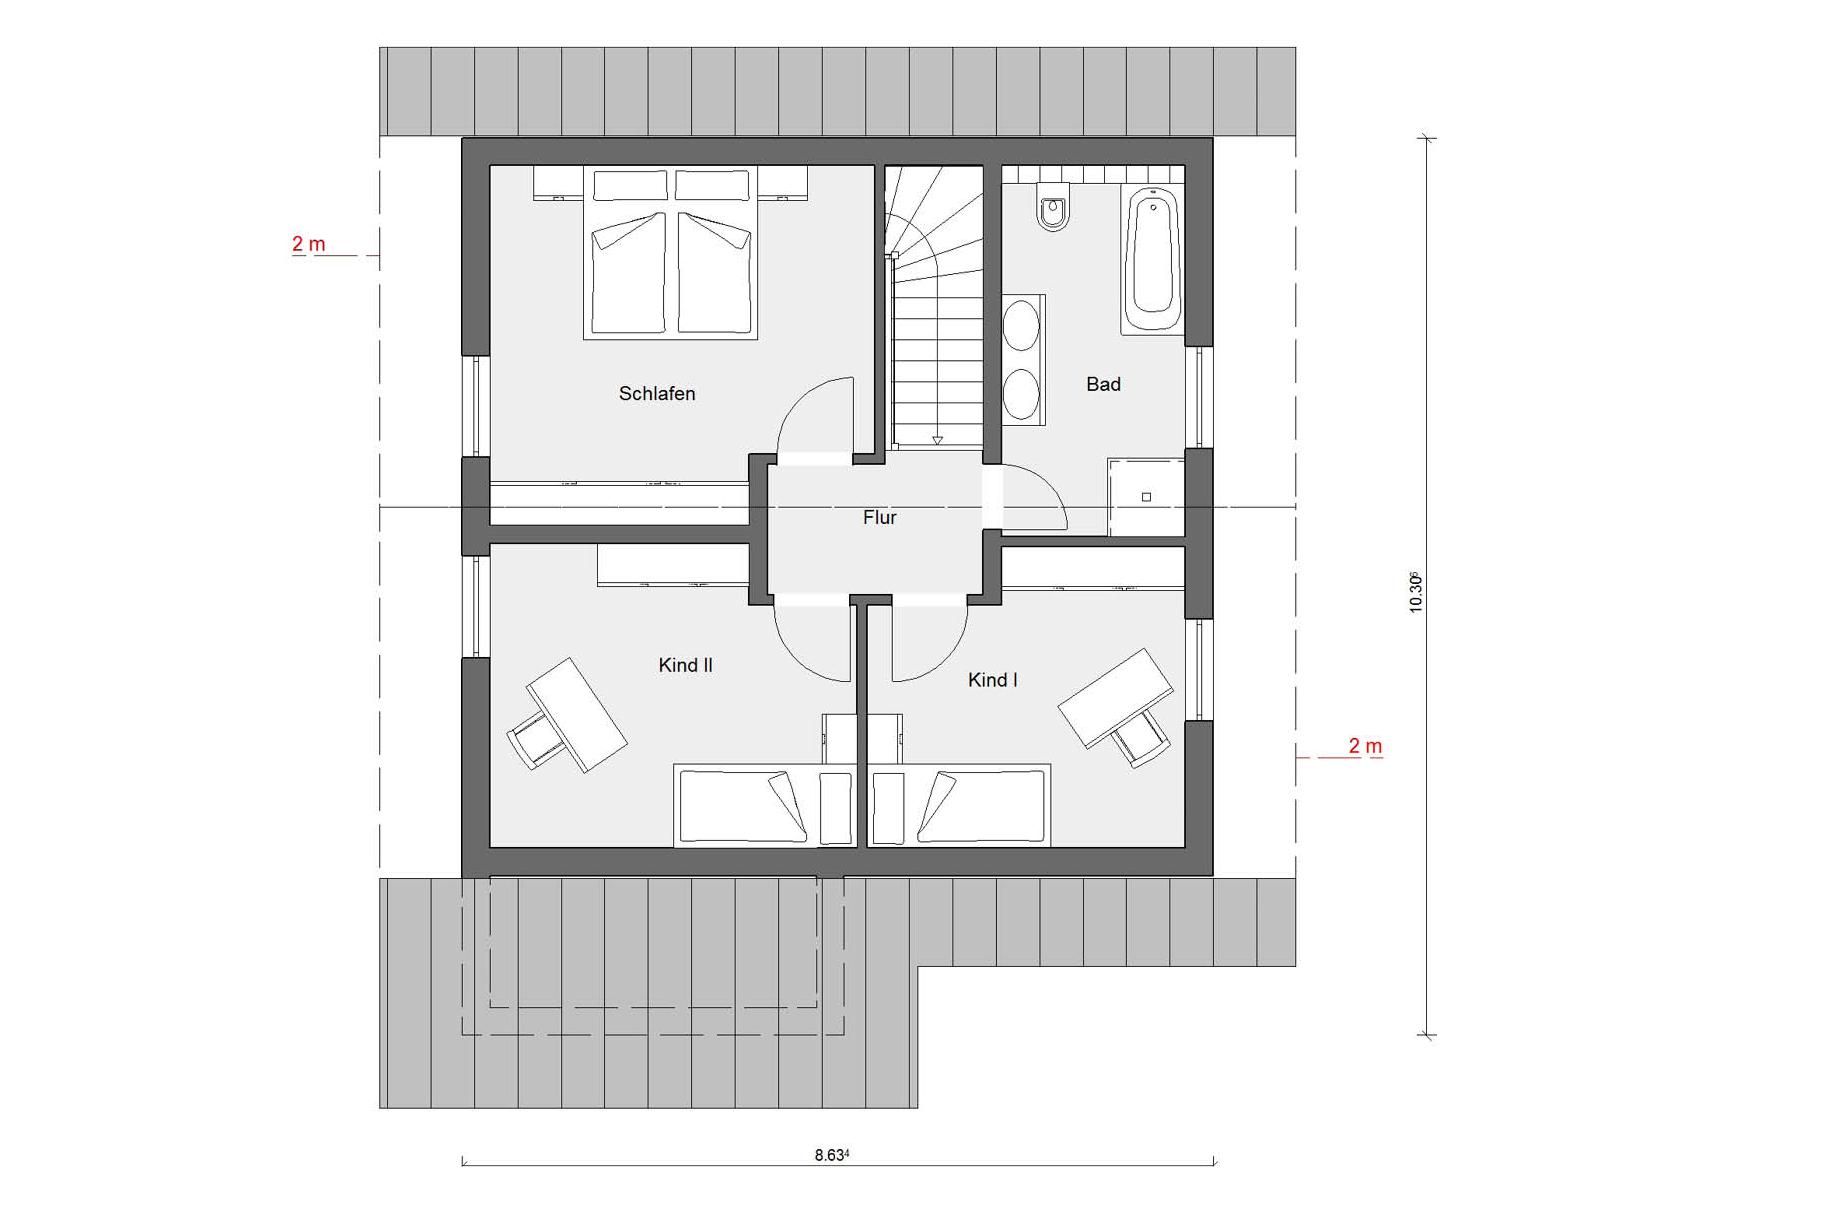 Attic floor plan E 15-125.3 House with large glass surfaces